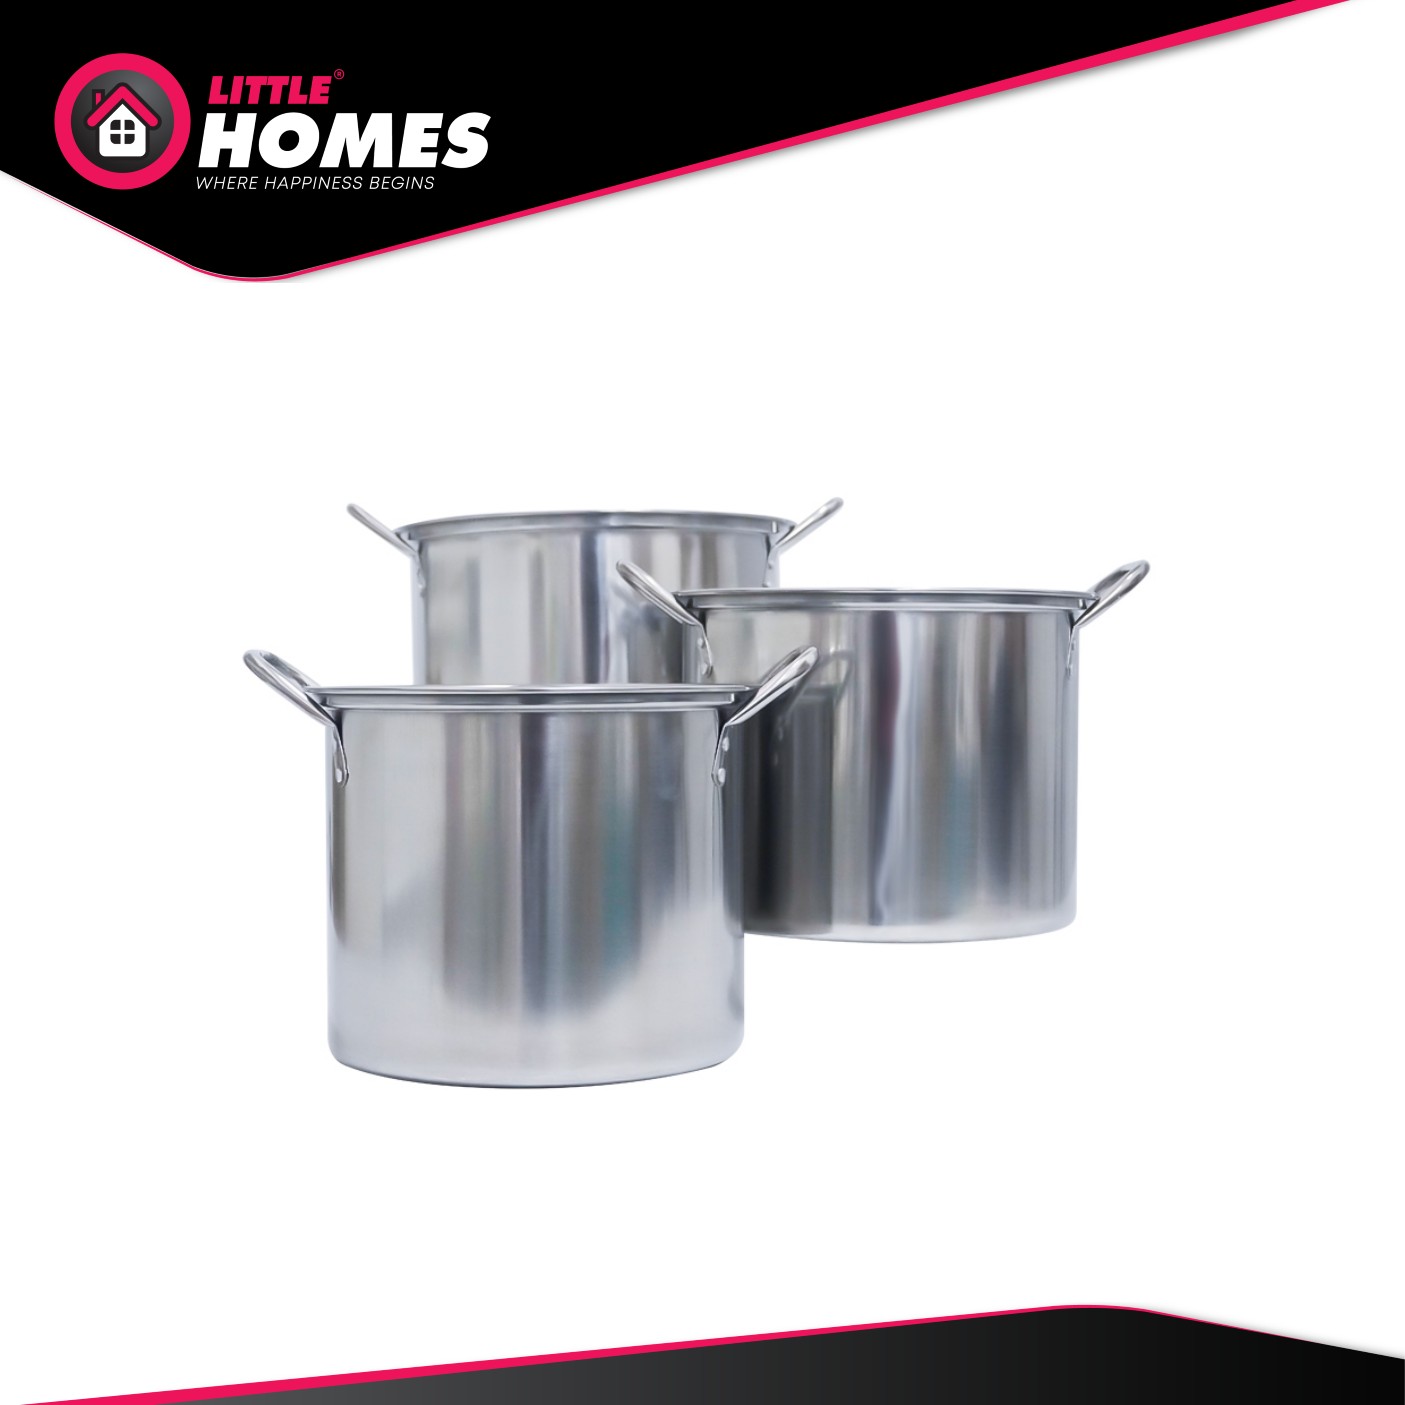 Little Homes Stainless Steel Stock Pot Set of 3 Sizes with Lid Multiple Sizes (6.3Lit, 8Lit & 9.6Lit)